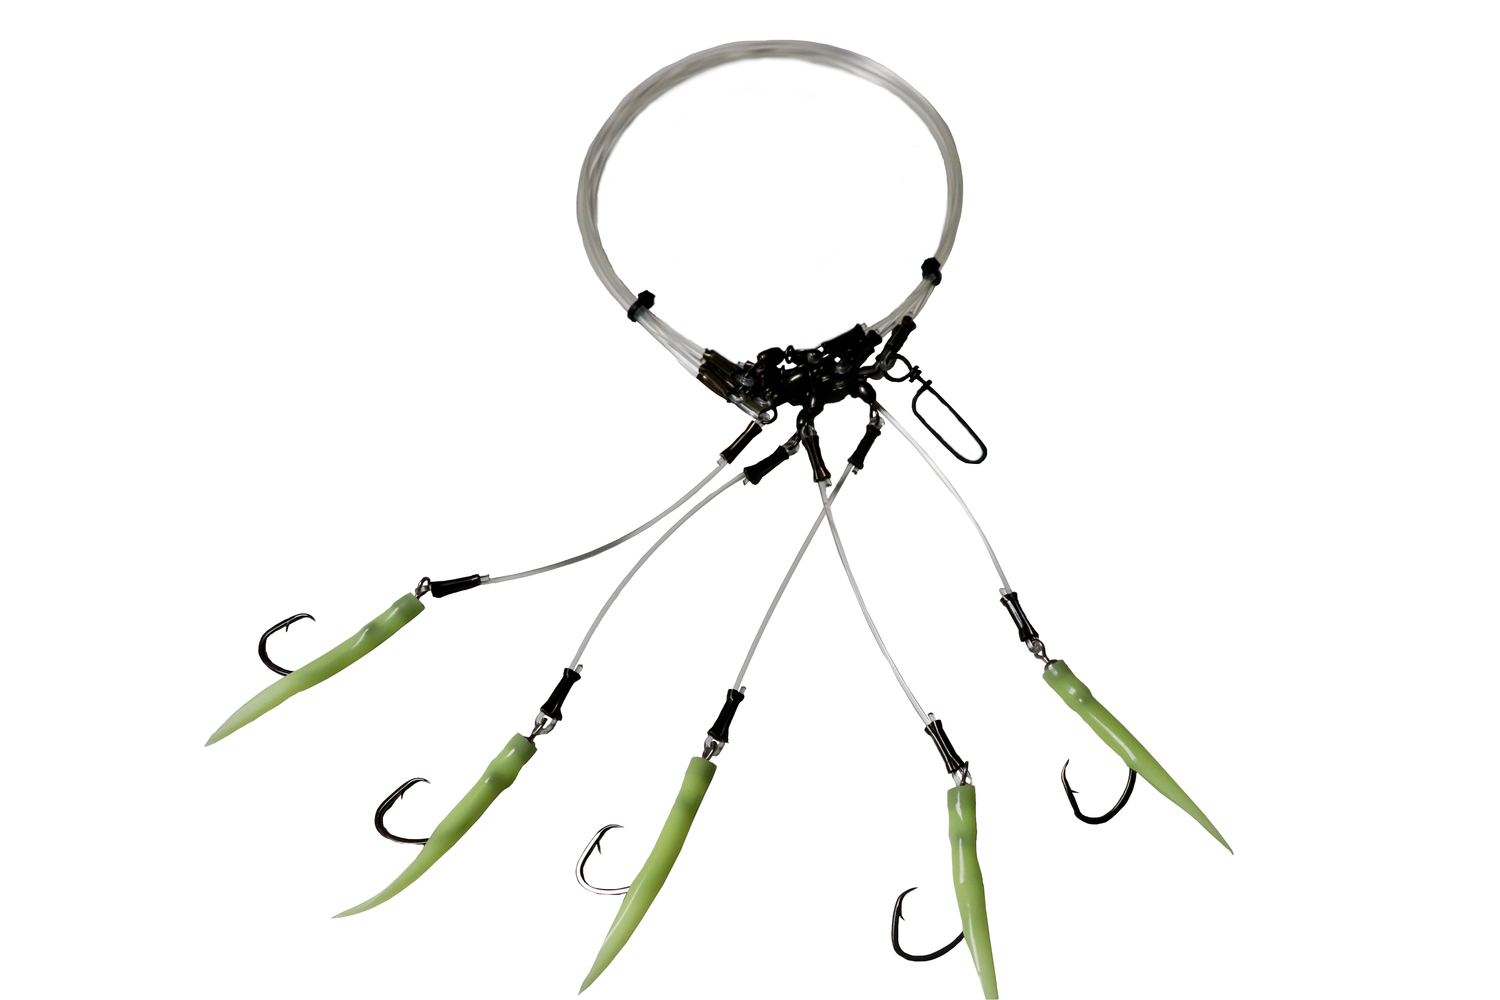 R&R Tackle Co.  Premium Saltwater Fishing Tackle